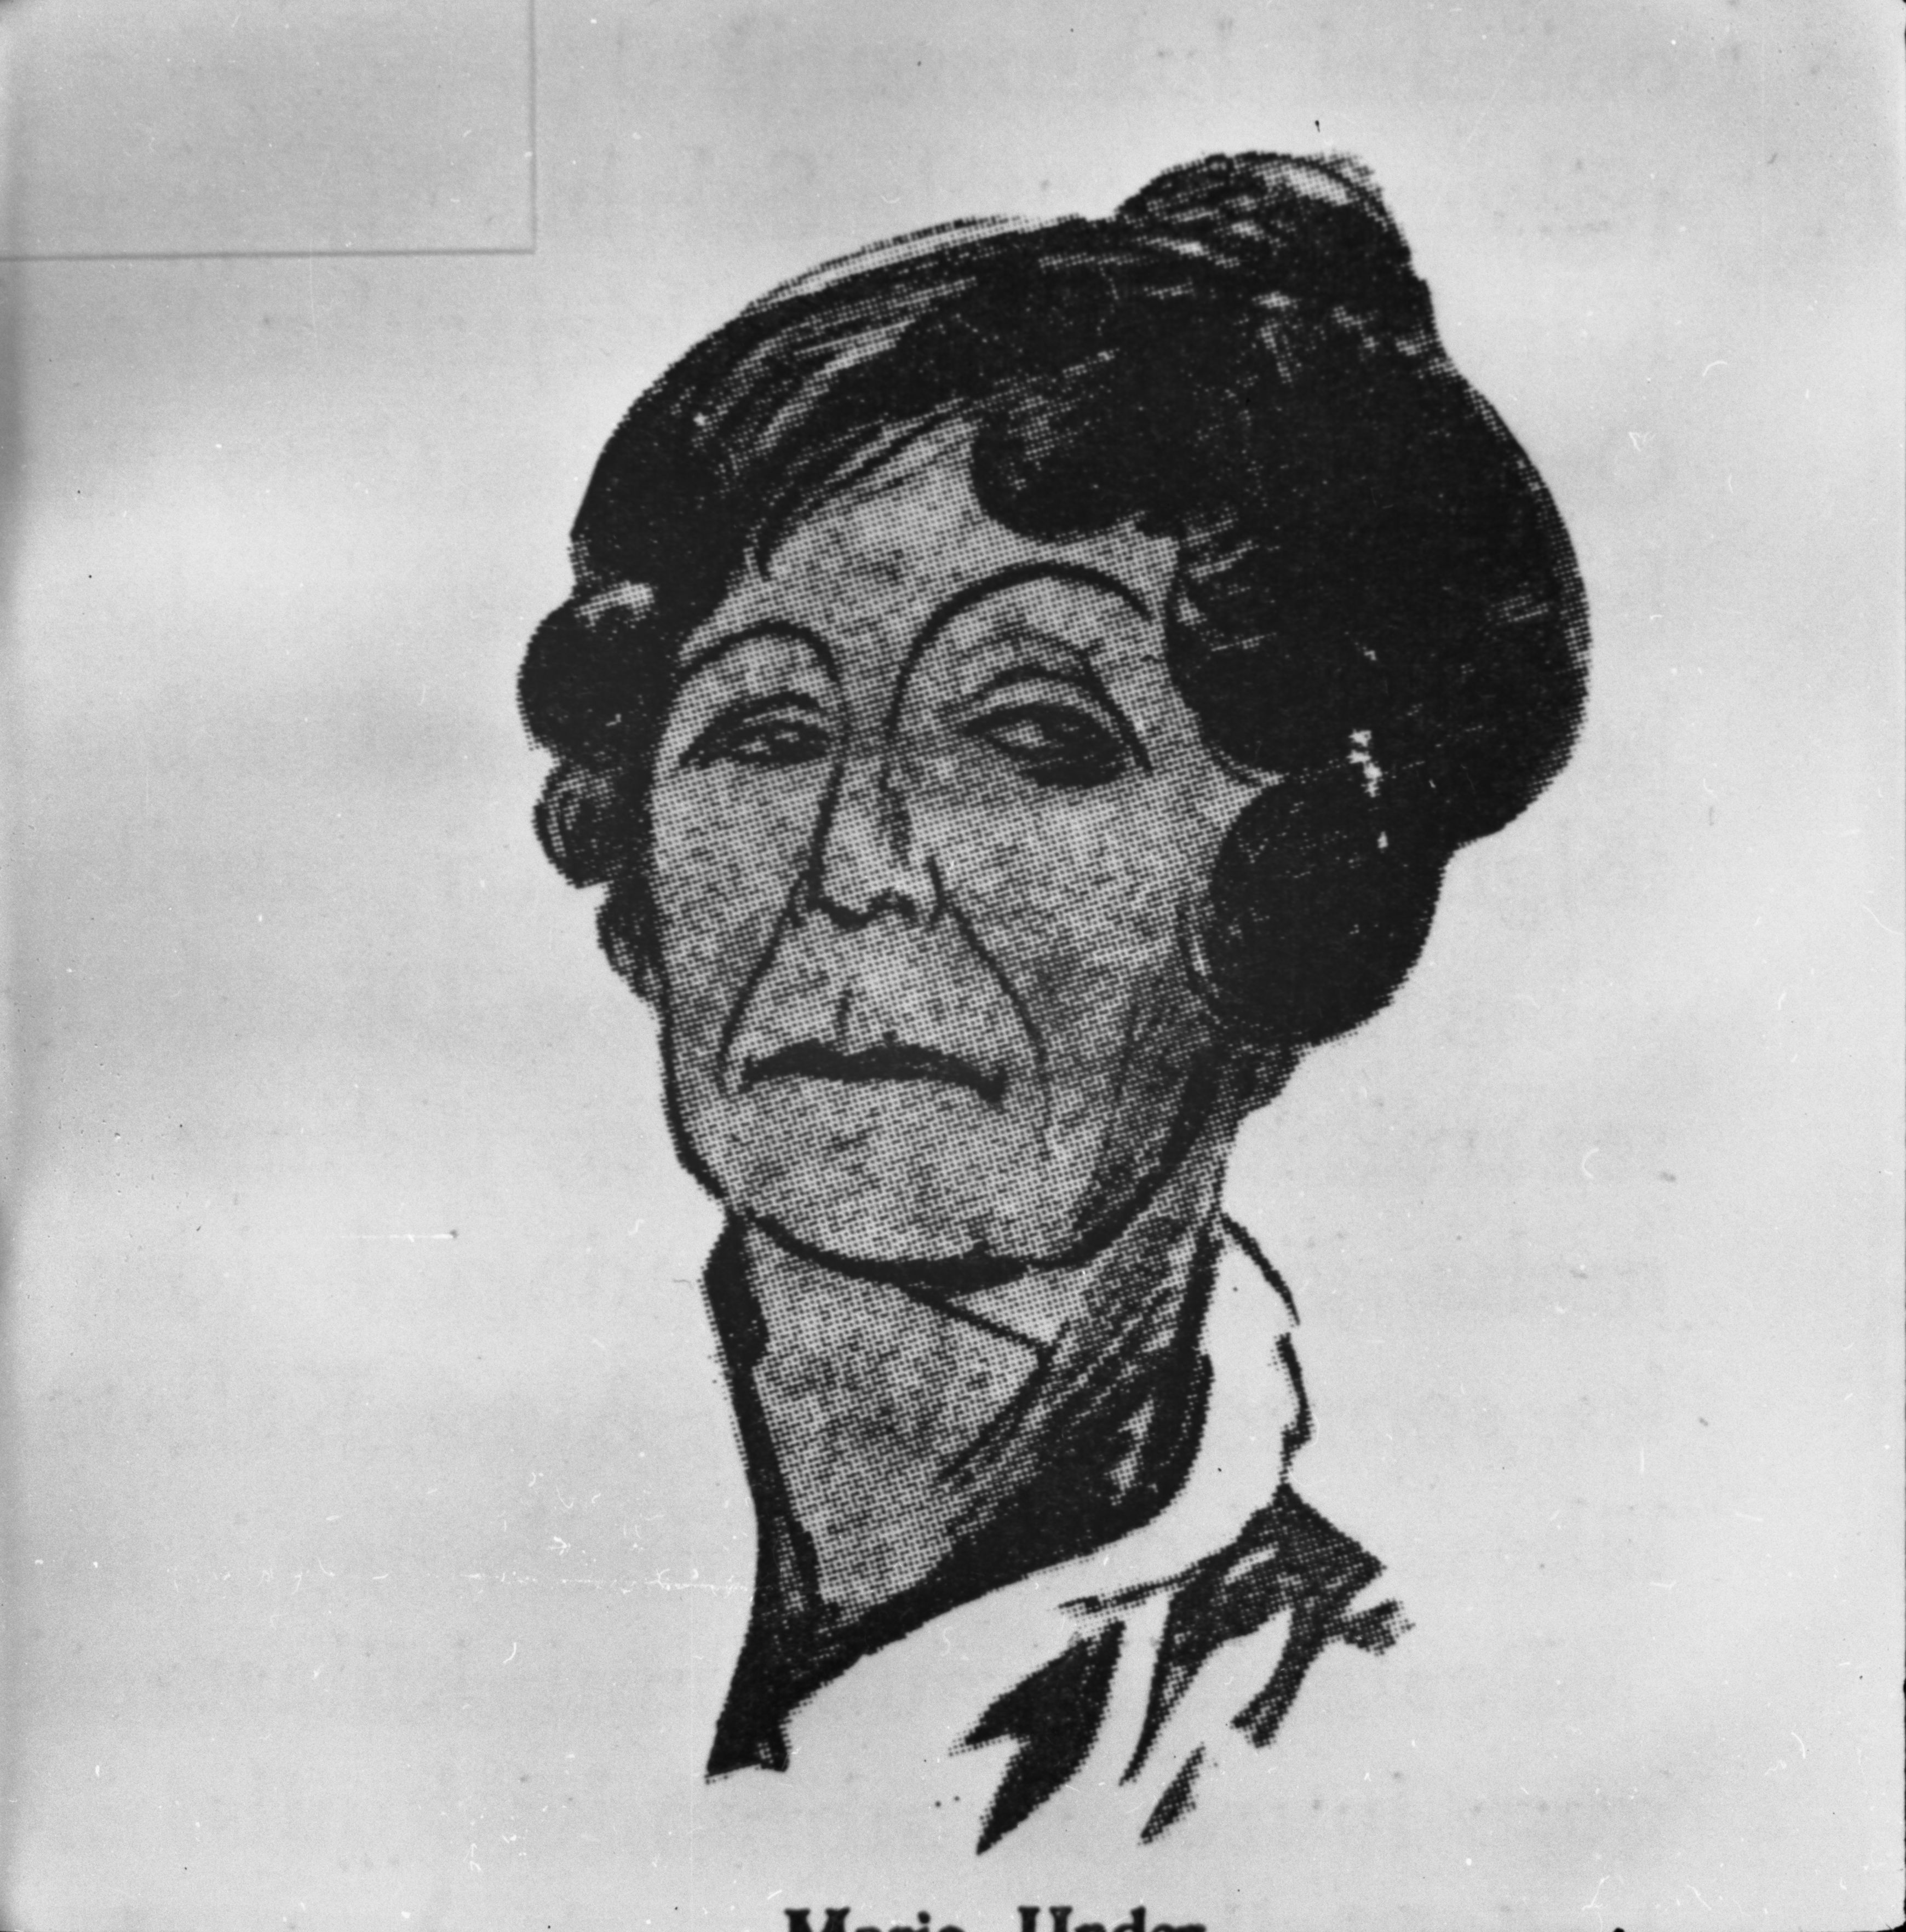 Marie Under. In the case of the publication of the Shark Ballates of the whole "Happy Shelter" in 1929.